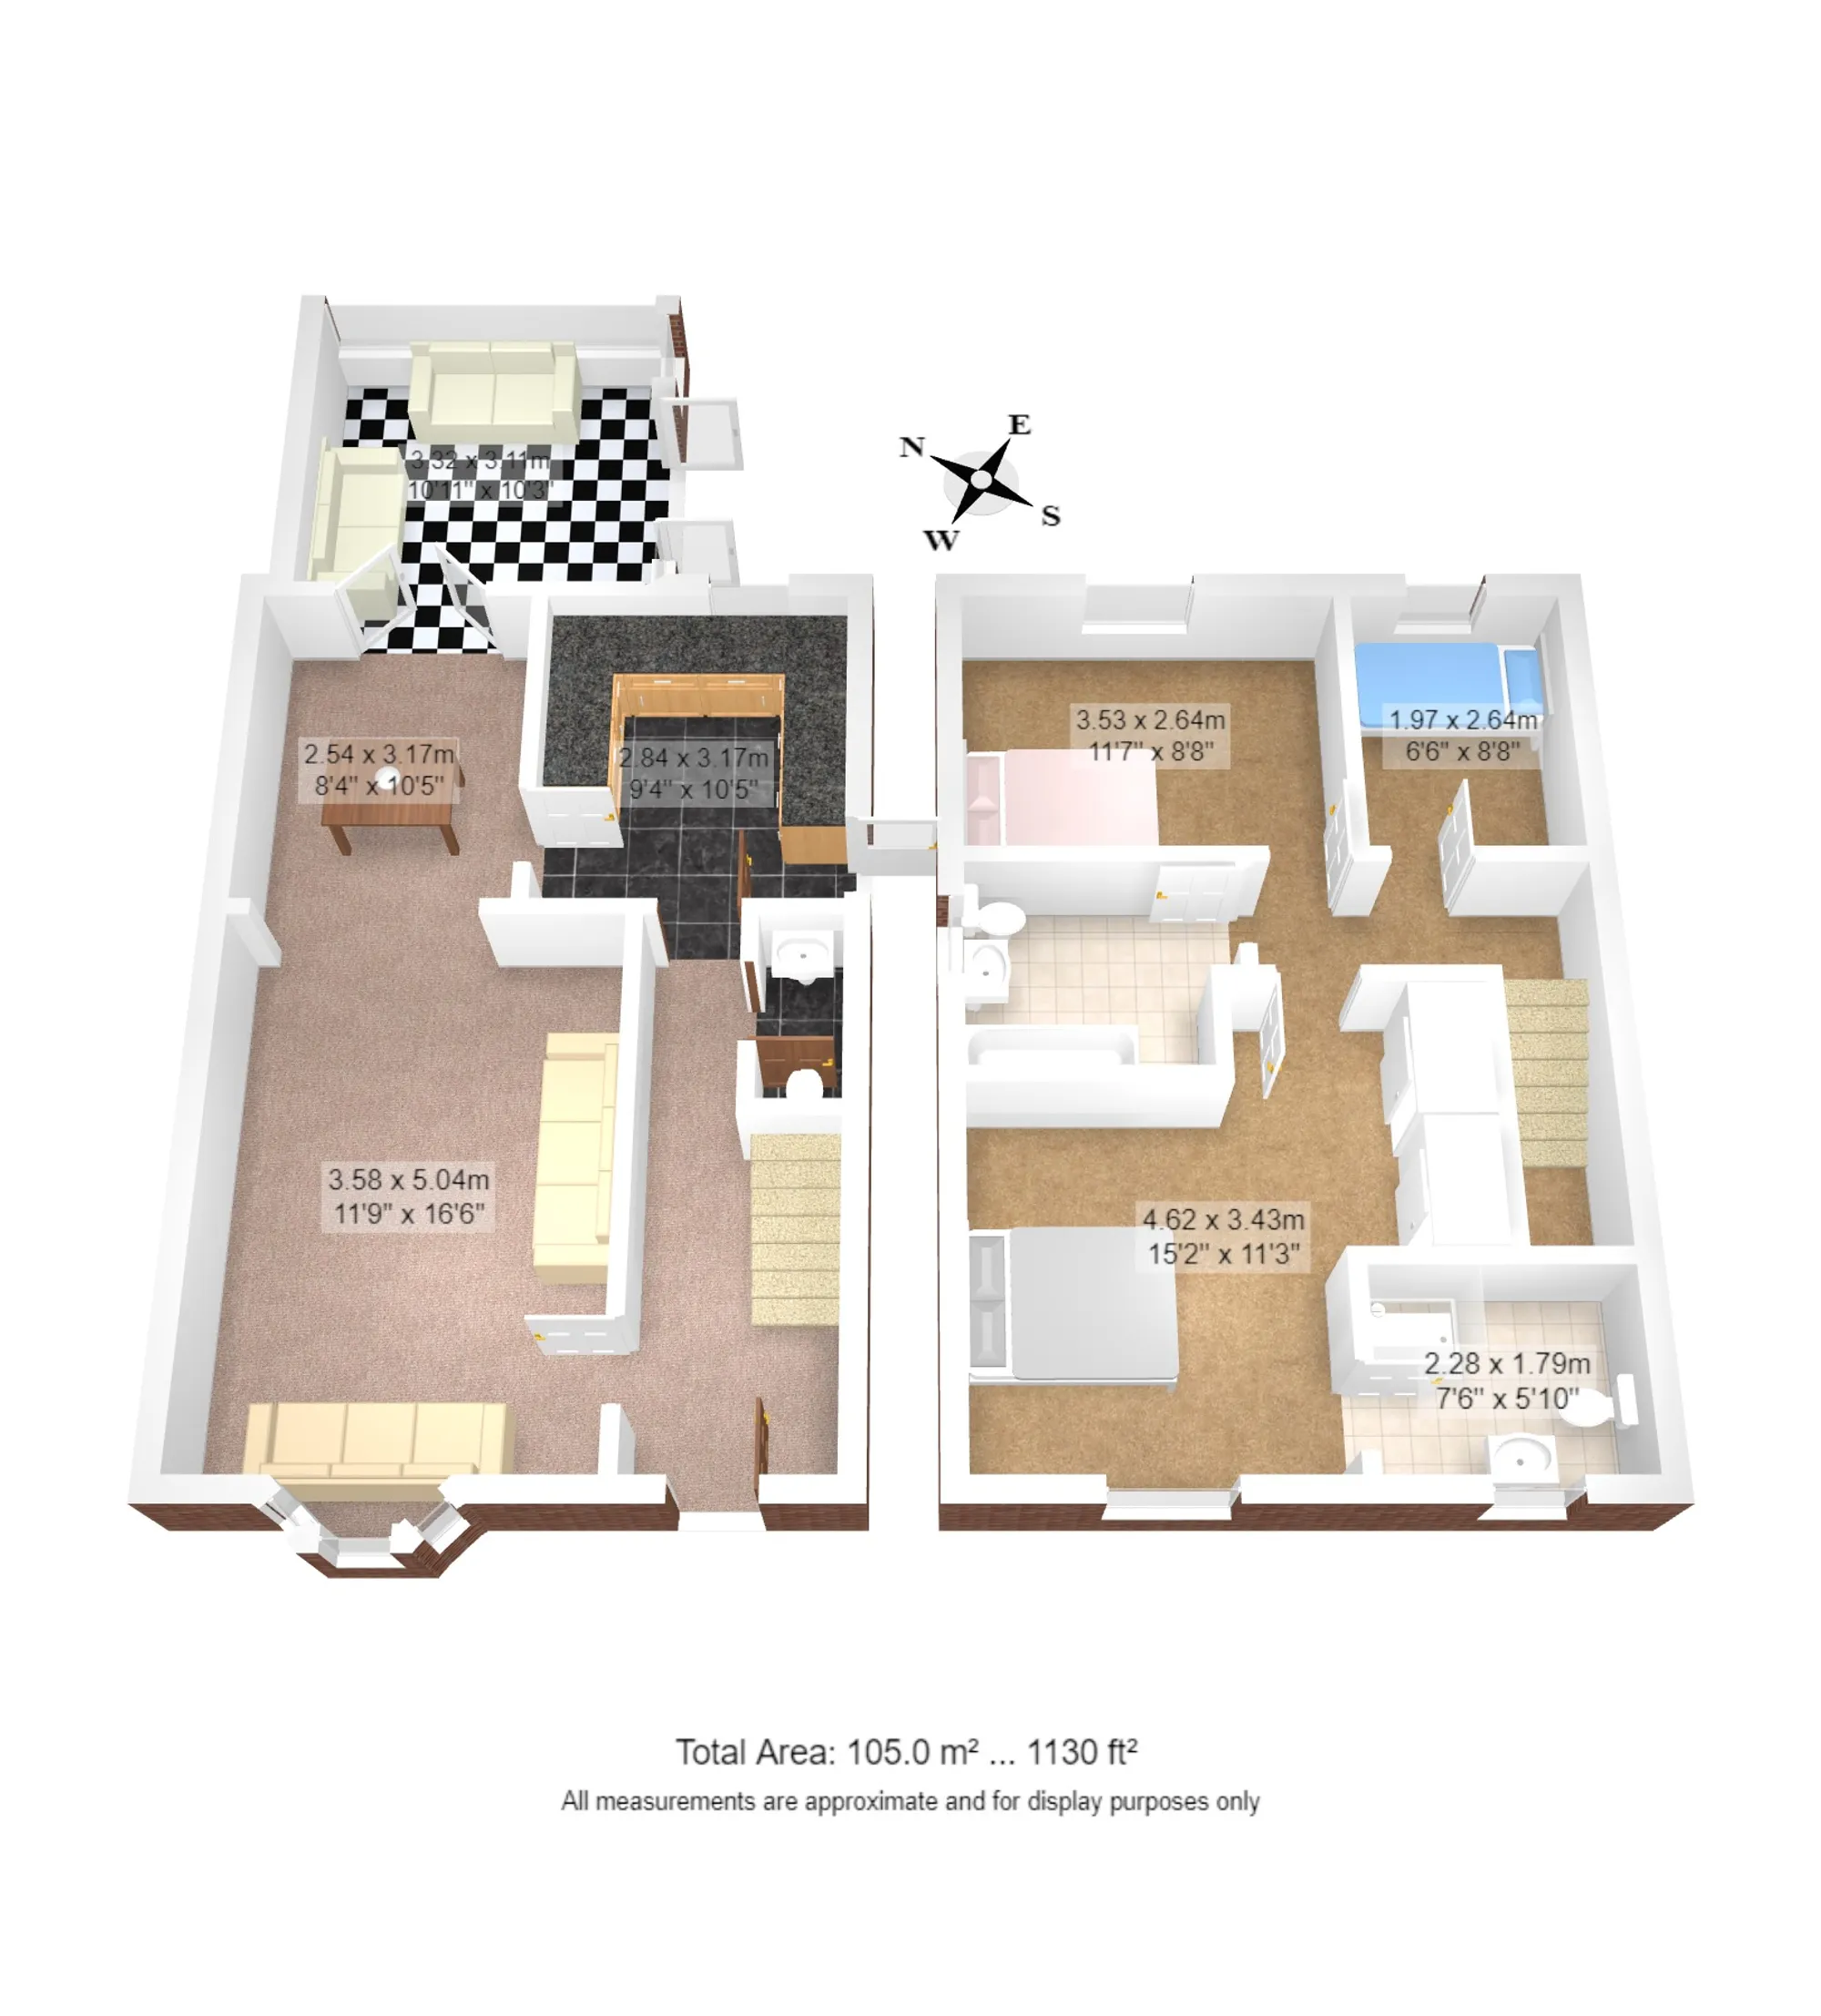 3 bed detached house for sale in Dean Road, Manchester - Property floorplan